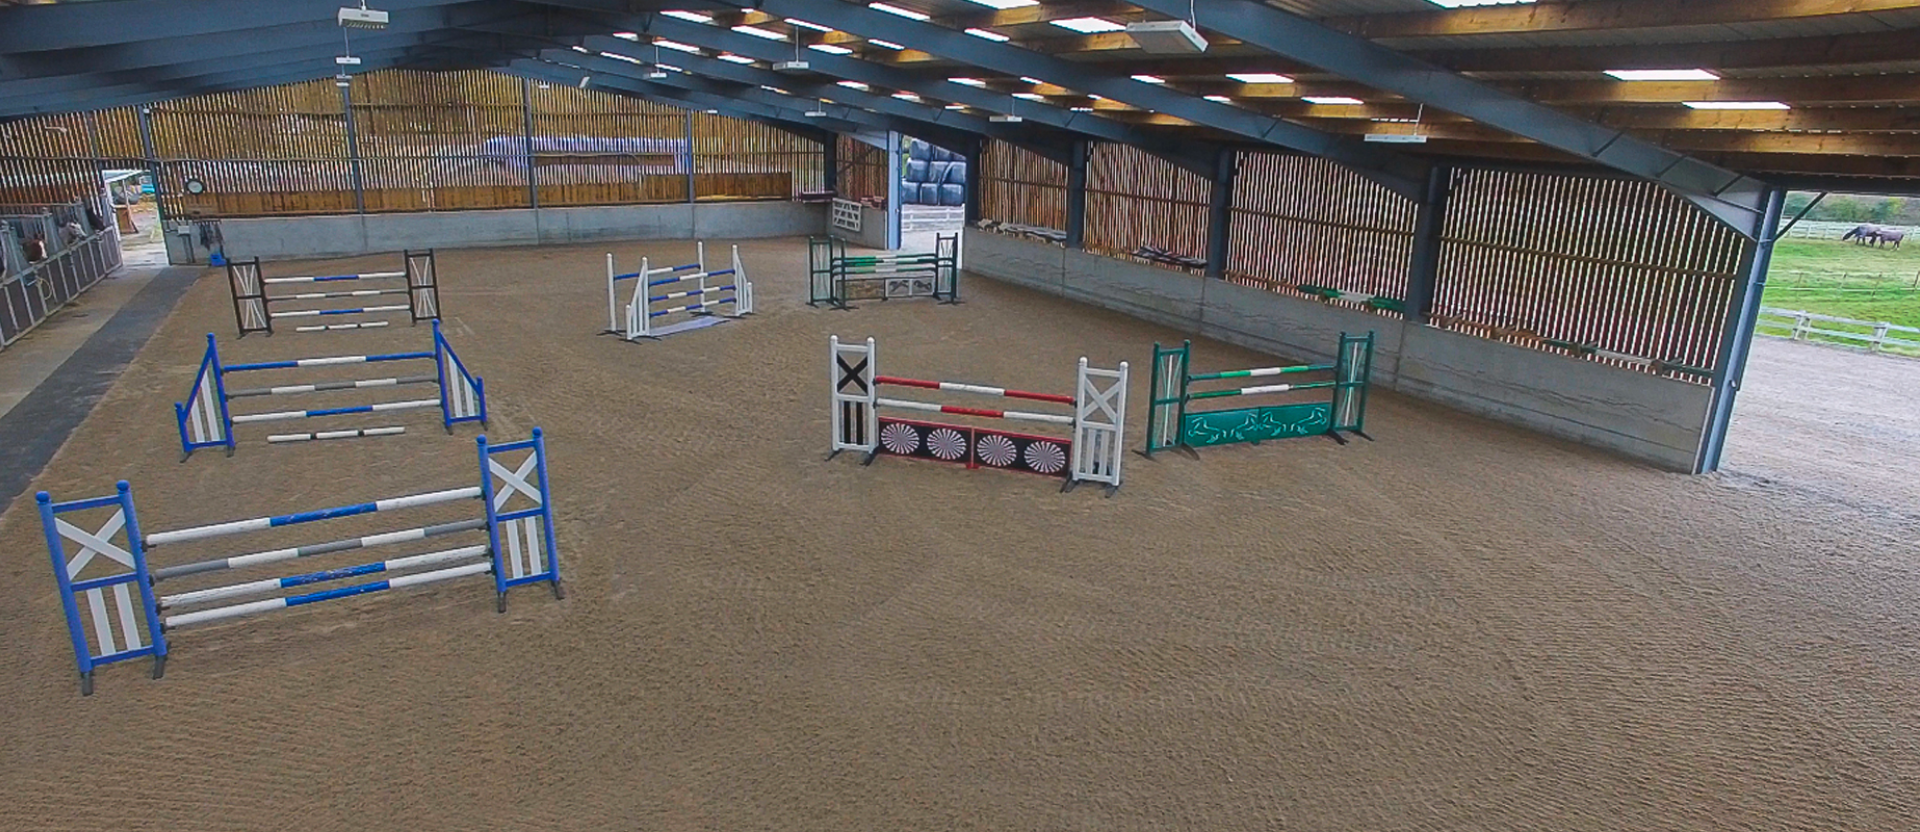 Horse riding arena with hurdles